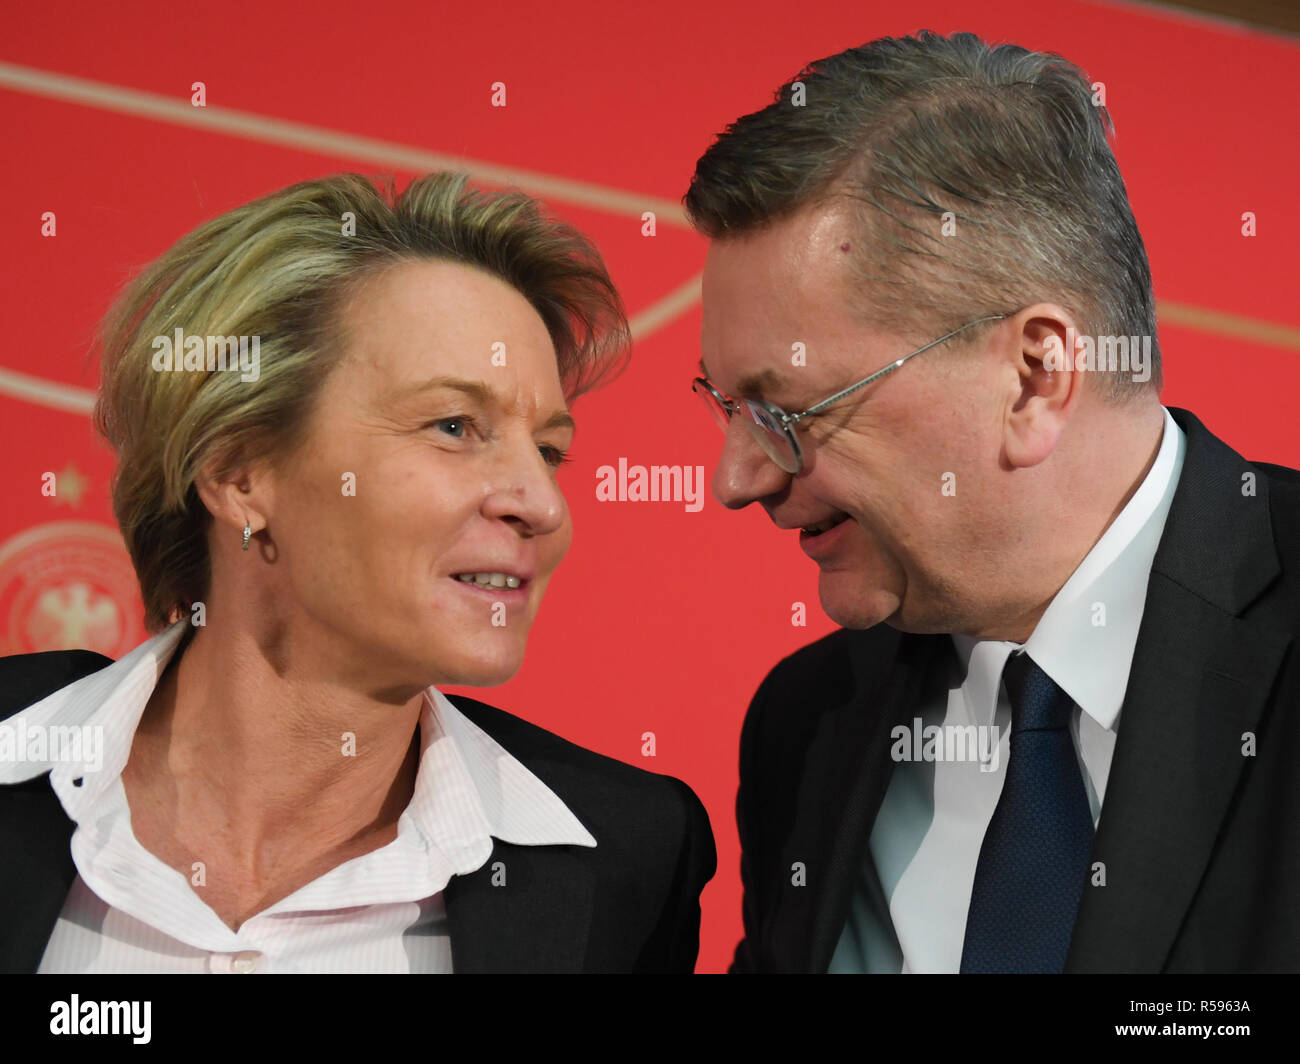 30 November 2018, Hessen, Frankfurt/Main: Martina Voss-Tecklenburg, the new national coach of the women's national team, and Reinhard Grindel, President of the German Football Association (DFB), talk to each other after a press conference at the DFB headquarters. Voss-Tecklenburg was previously coach of the Swiss women's national team and is the successor to Horst Hrubesch. Photo: Arne Dedert/dpa Stock Photo